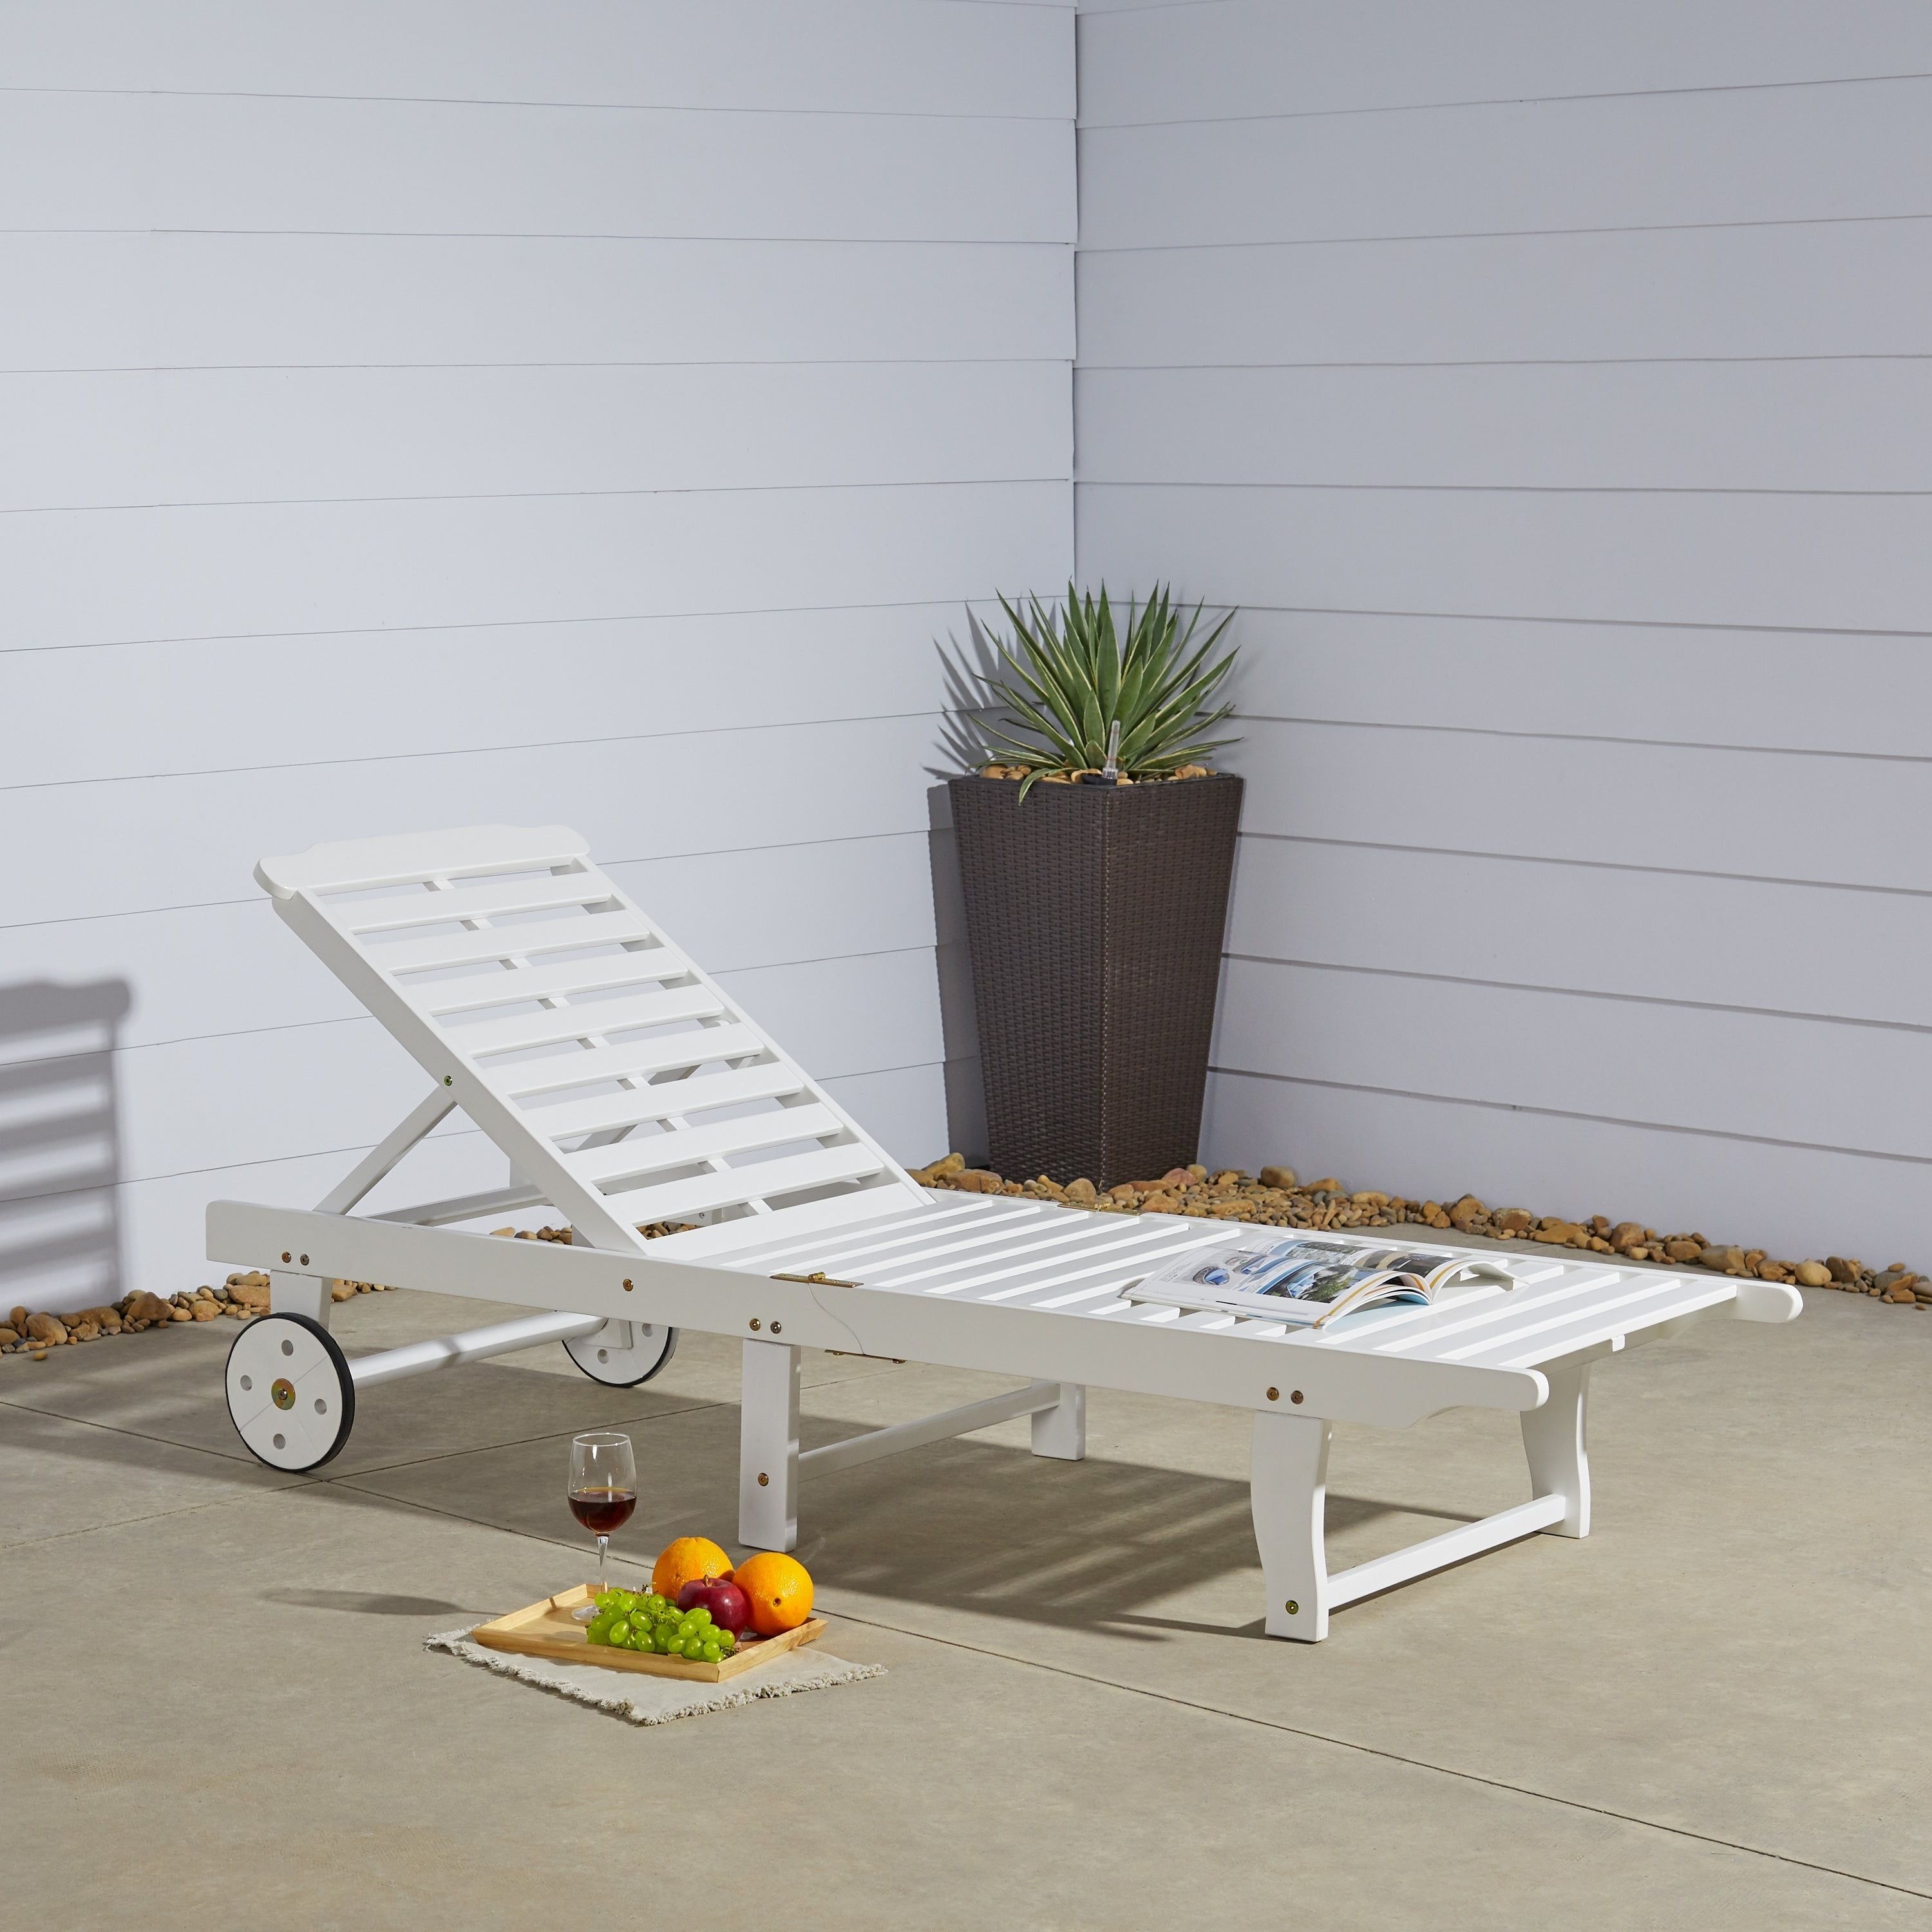 2020 Havenside Home Surfside Rutkoske Outdoor Wood Chaise Lounges Pertaining To Havenside Home Surfside Rutkoske Outdoor Wood Chaise Lounge (View 4 of 25)